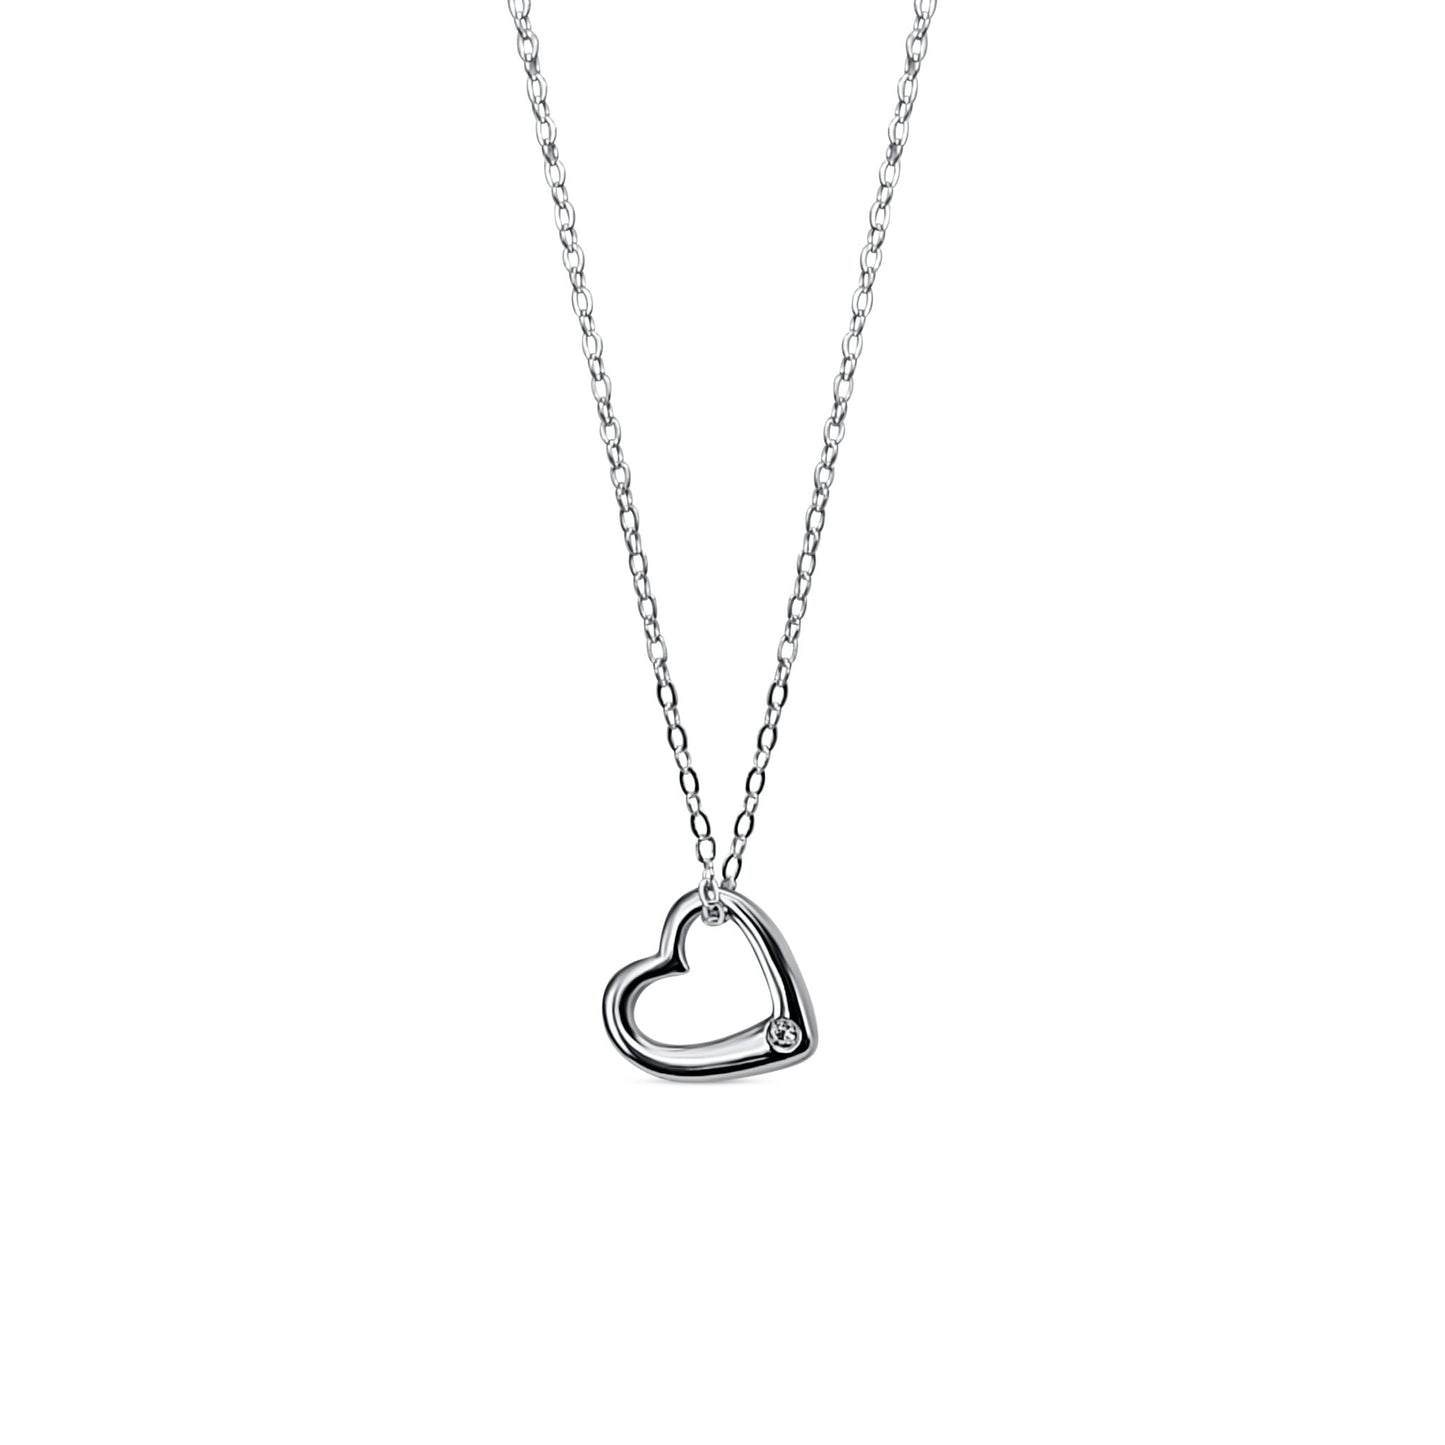 small silver heart pendant with white sapphire gemstone on chain necklace